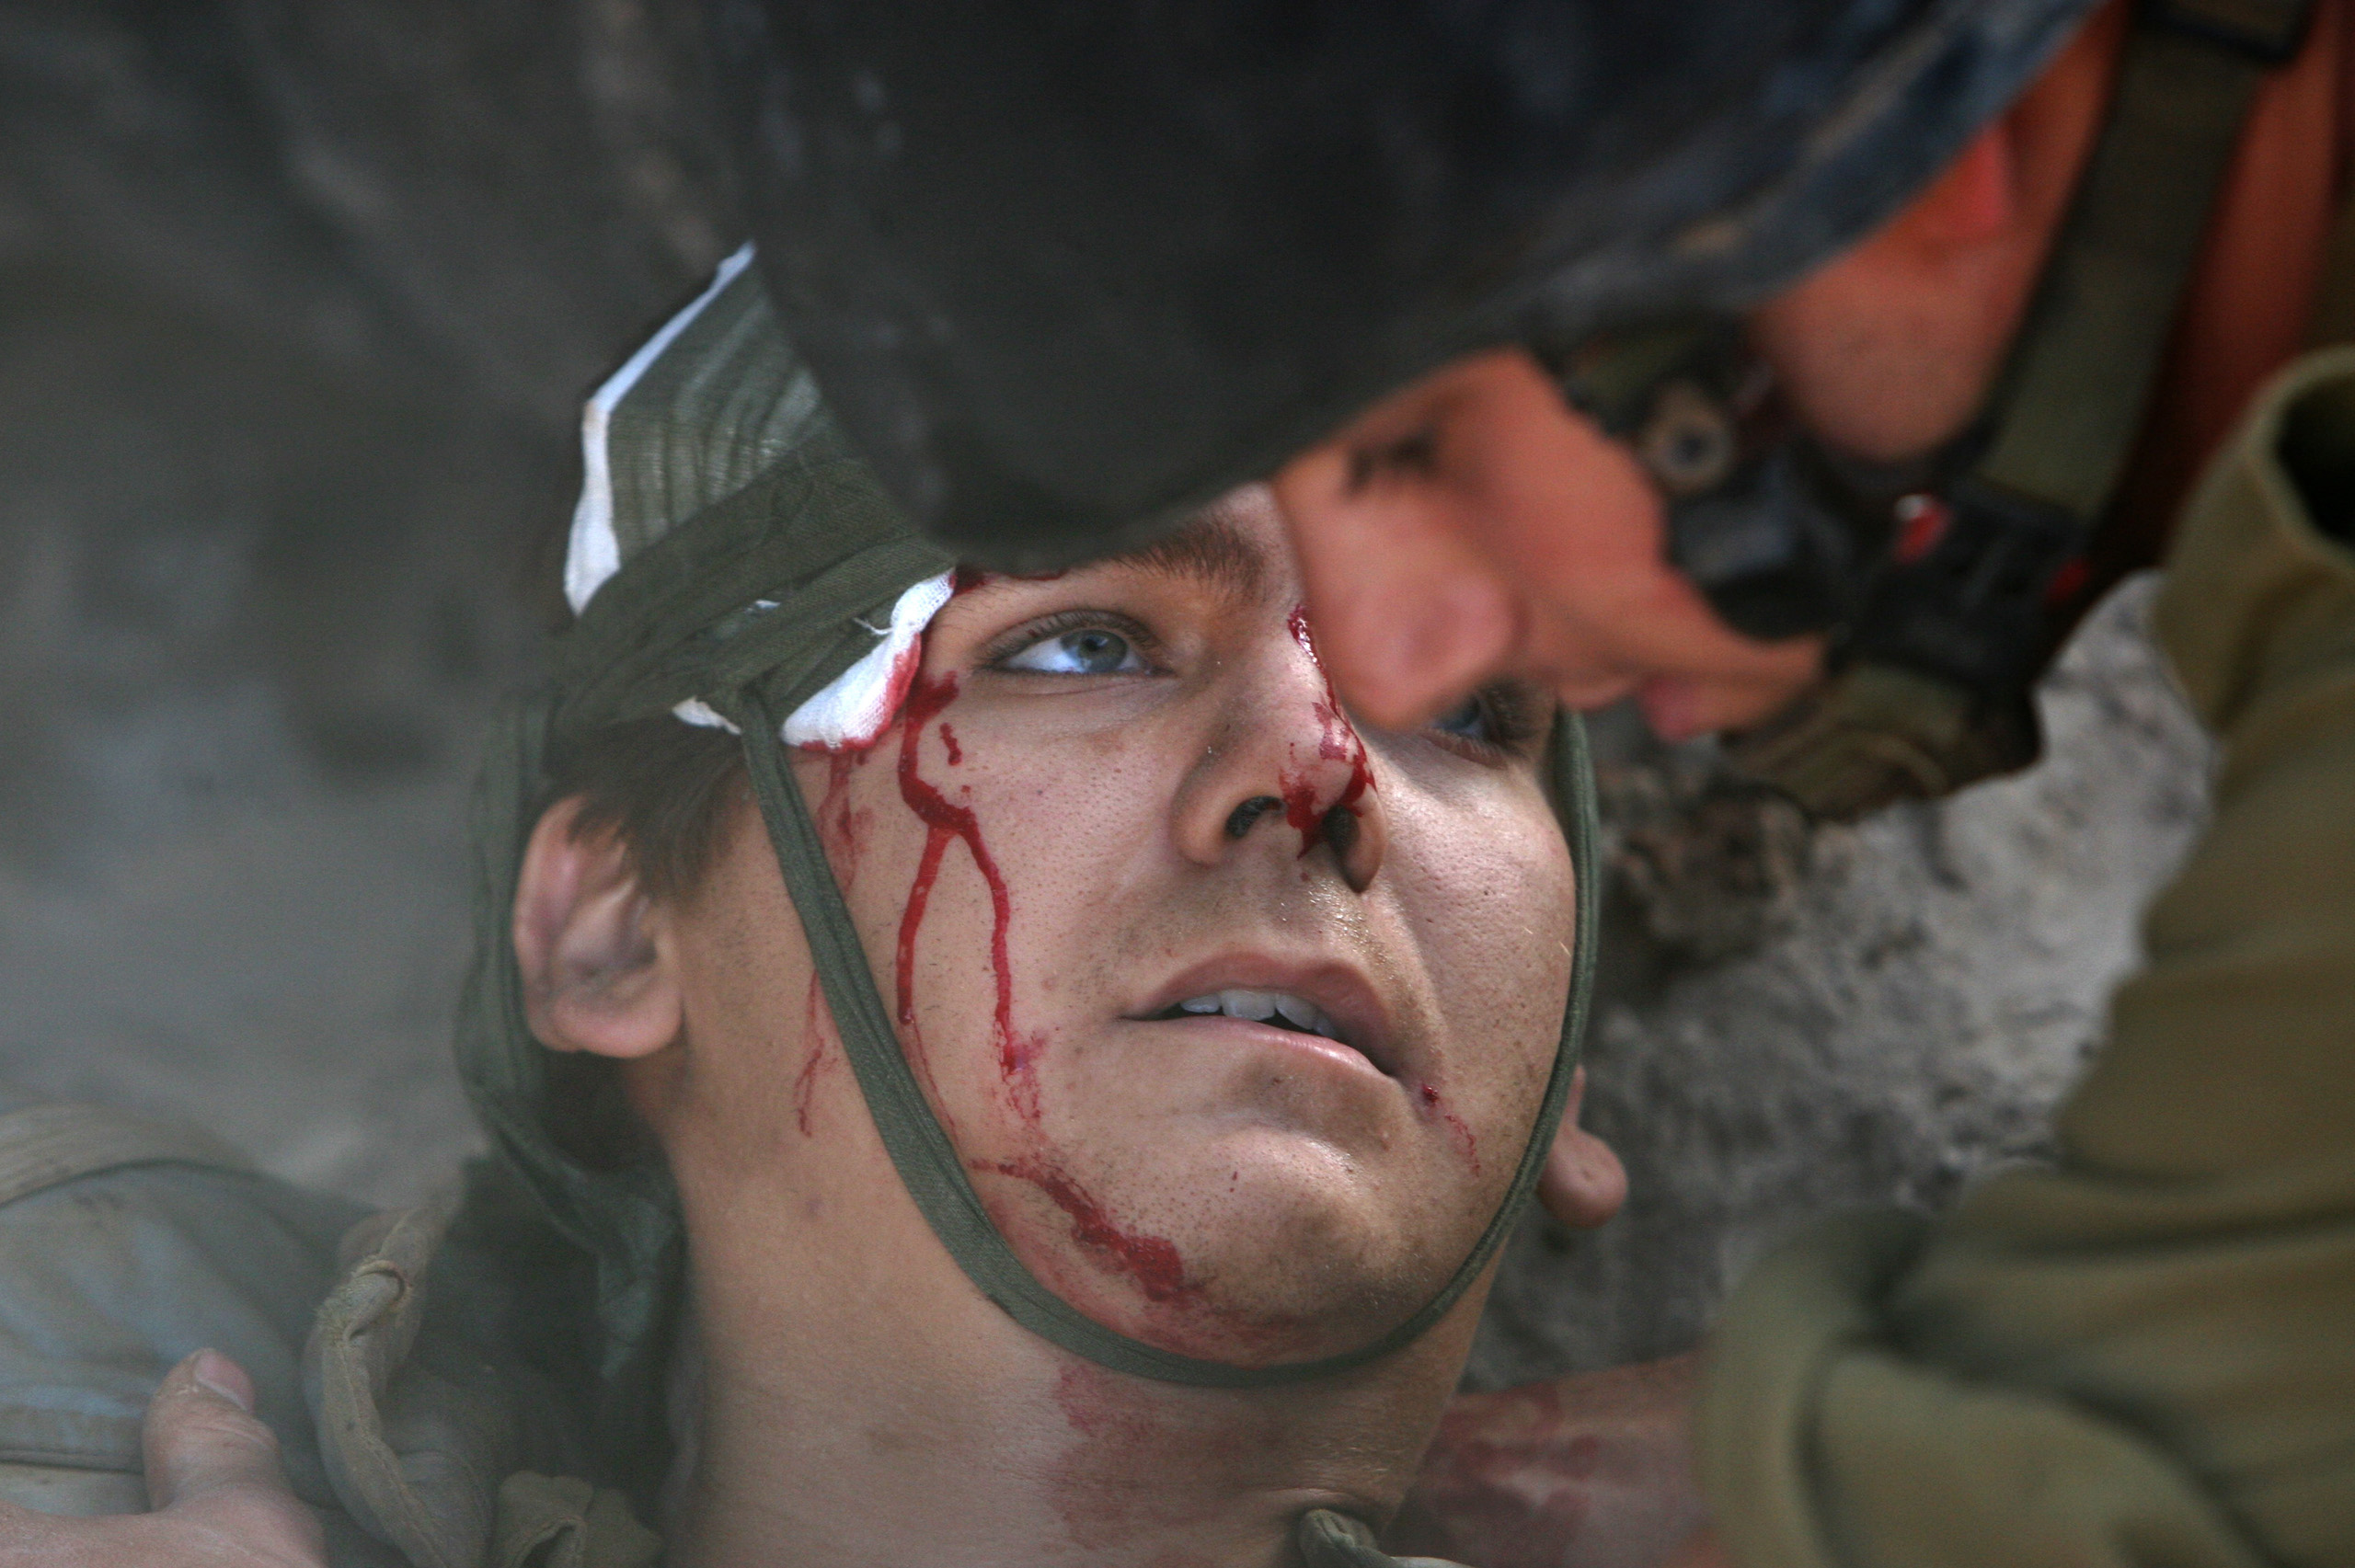 This image I took, as the only embedded photographer with the Israeli Defense Forces in Lebanon (IDF),  depicts a classic "sacrifice" visual narrative of a hero giving his life for his nation. I was told by several people that it was ’very Vietnam’. Since this image was not overtly gruesome and since the soldier survived his injuries, it could be prominently displayed. I later learned that this scene actually represents a victim of a friendly fire incident, though it had already circulated and had been published with the caption that this soldier had been wounded in a Hezbollah attack. Because I insisted that information be included in the caption, the image lost value as a propaganda tool. This soldier was inconveniently hit by the wrong explosives.
                        
                        I have come to believe that embedded ‘war photography’ simplifies the brutal ambiguity of conflict into well-worn and widely recognized visual templates. We, “war photographers,” help in reinforcing masculine myths of war as a purging experience. As it stands, I believe my images did a great disservice to the people who died or participated in this unnecessary and farcical demonstration of force in 2006, which besides claiming the lives of more than one hundred Israeli soldiers, also killed almost 30 times more Lebanese civilians than the 44 Israeli civilian dead. This conditioned Israeli public opinion to accept similar carnage in Gaza in 2009 and 2014 as a reasonable response. (Yoav Galai)